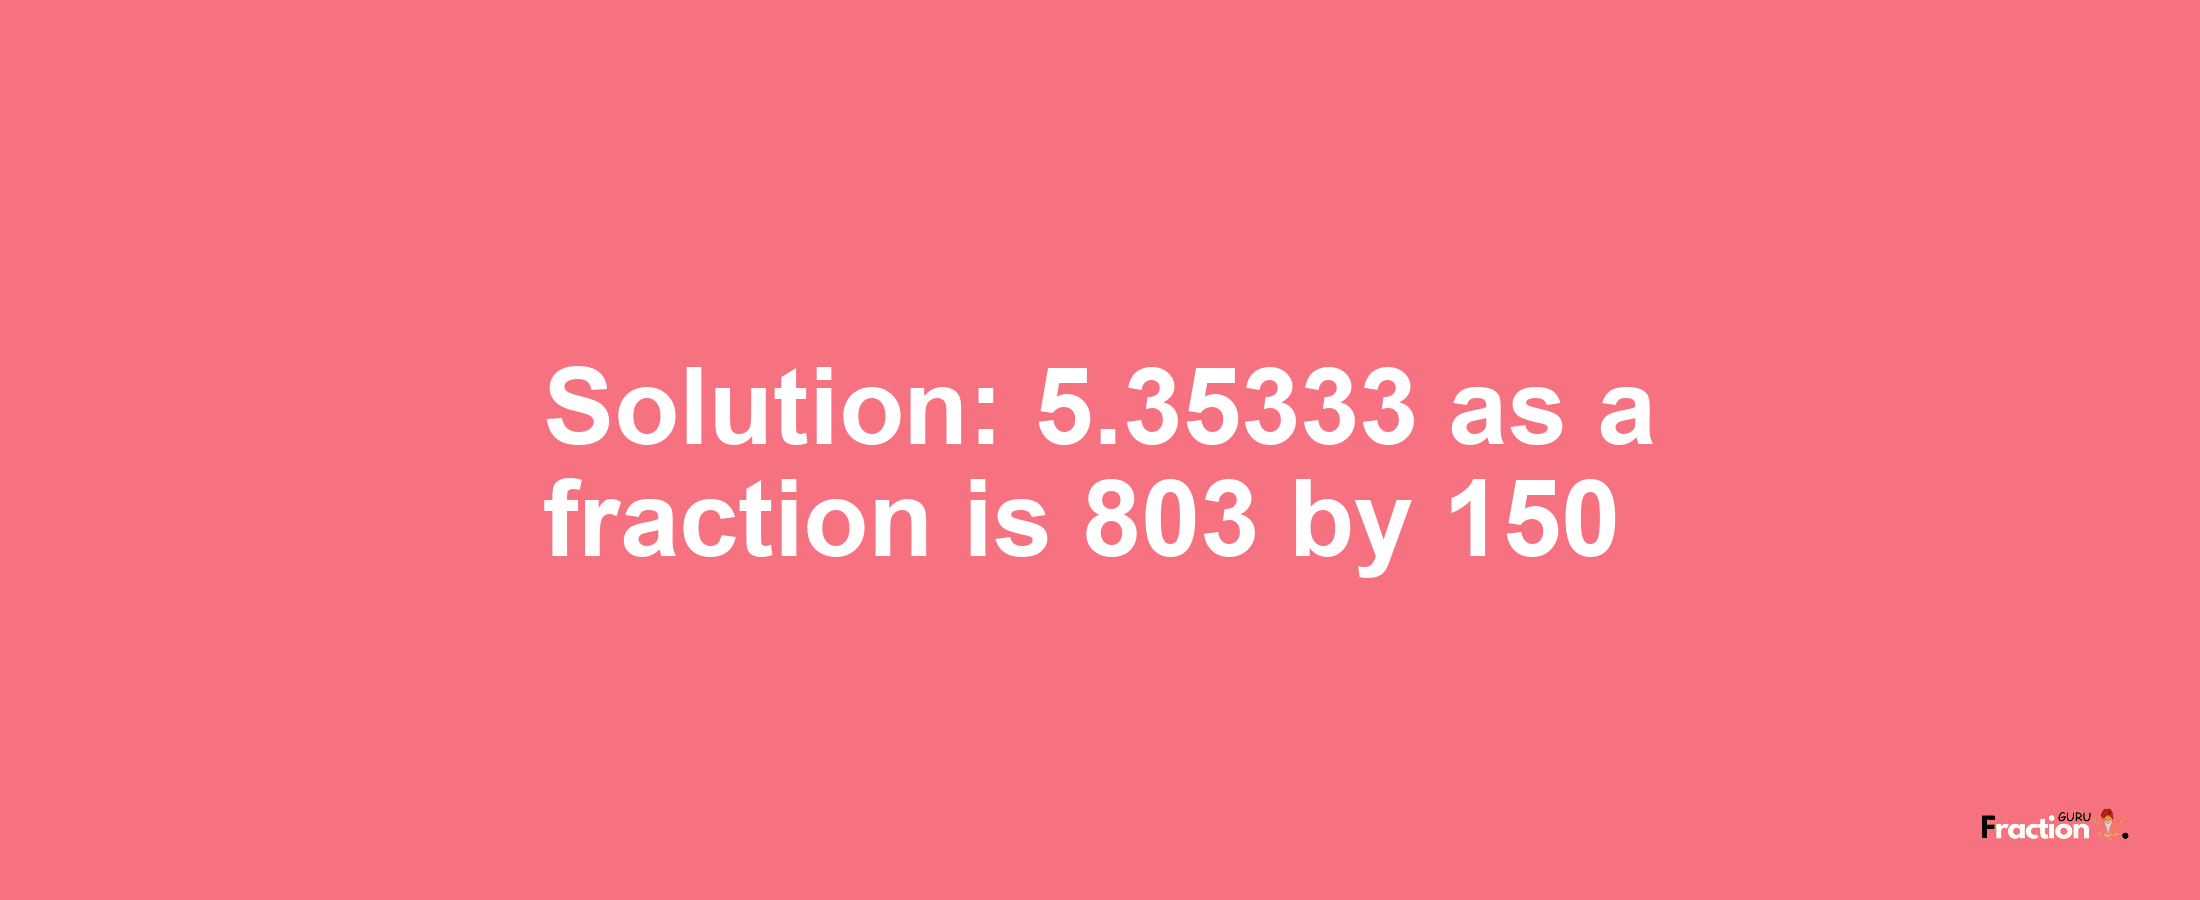 Solution:5.35333 as a fraction is 803/150